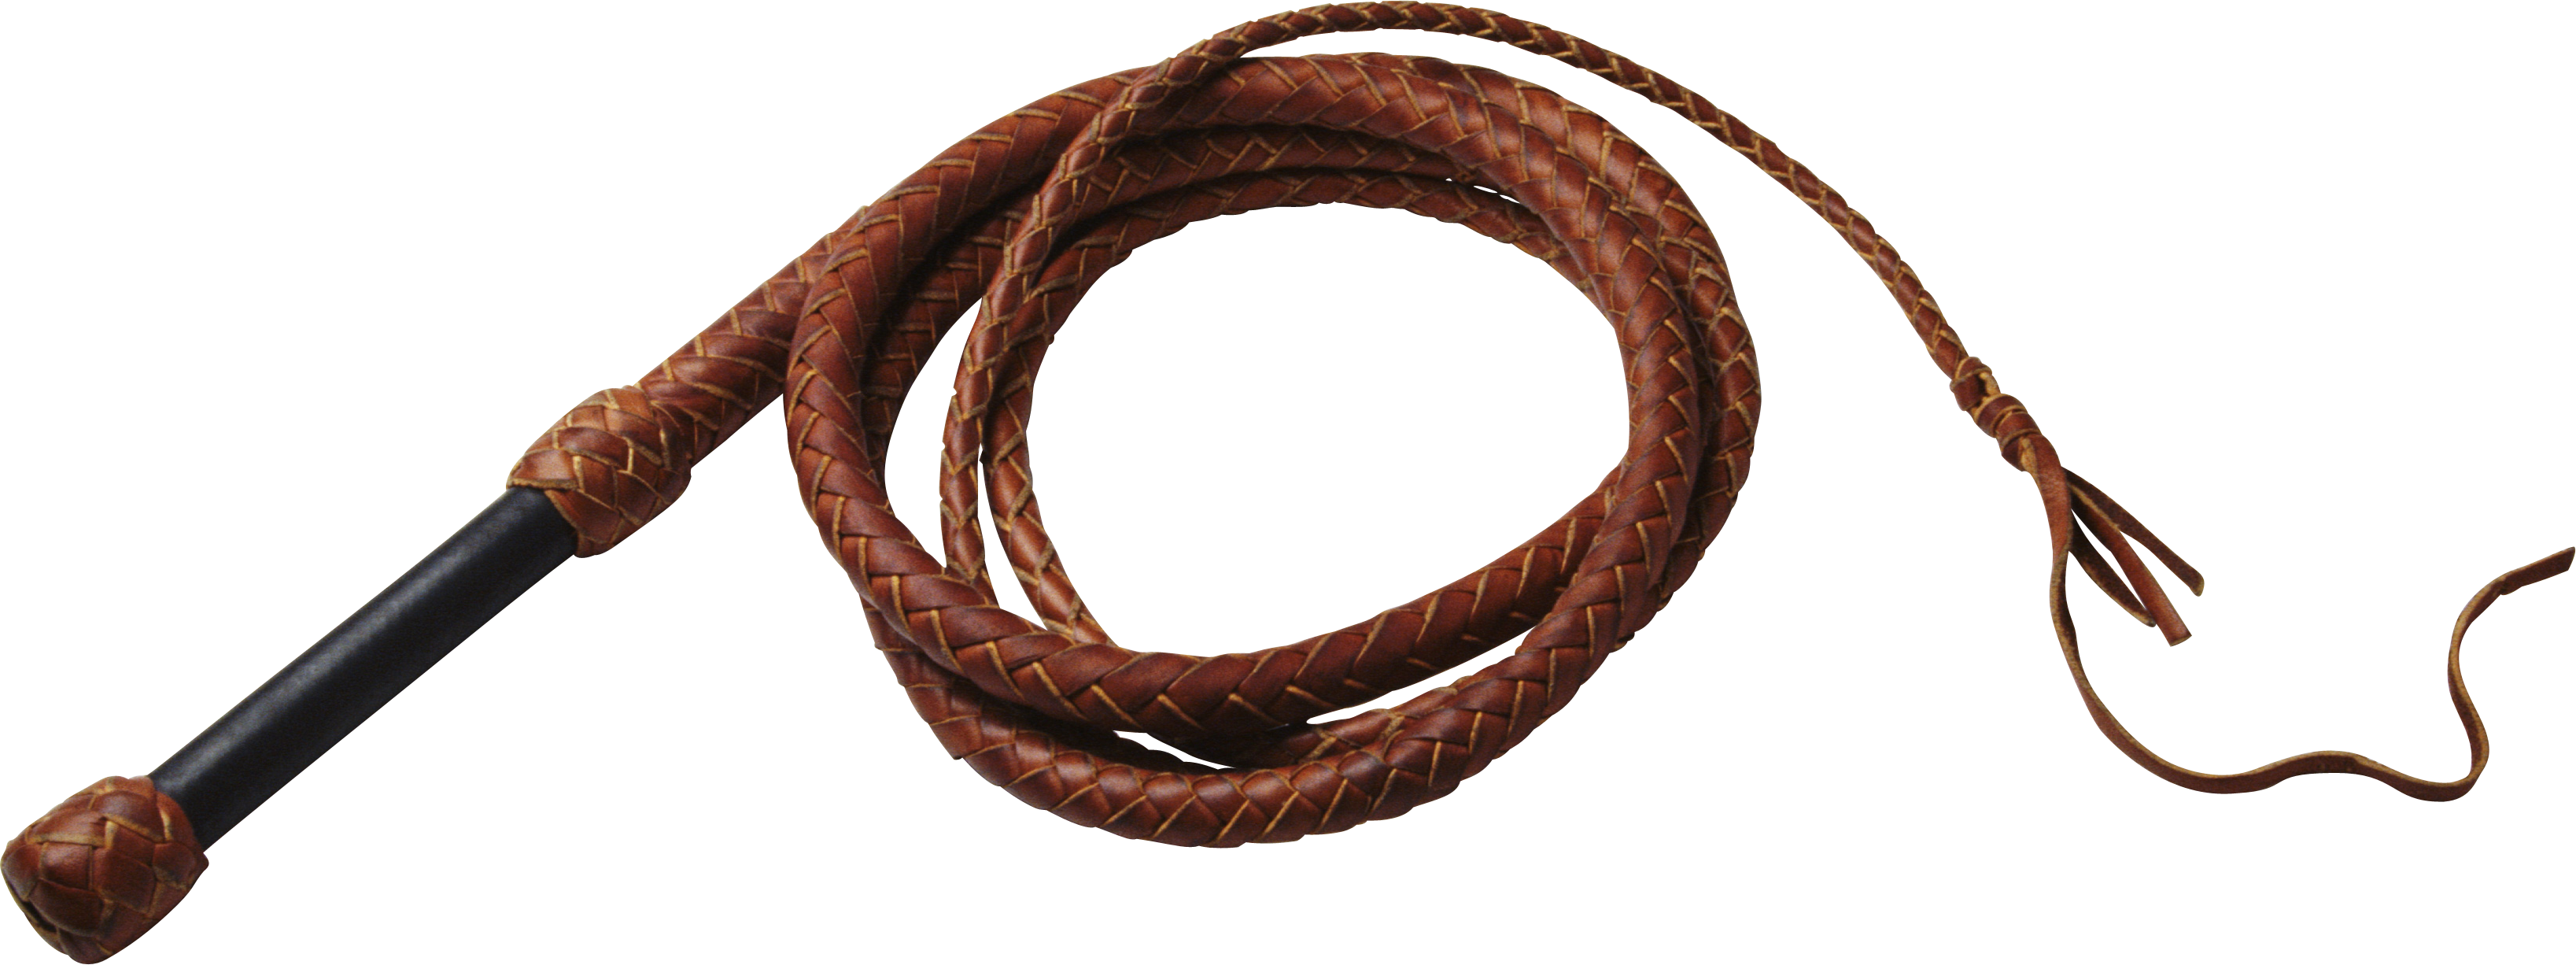 Download Whip PNG Image for Free